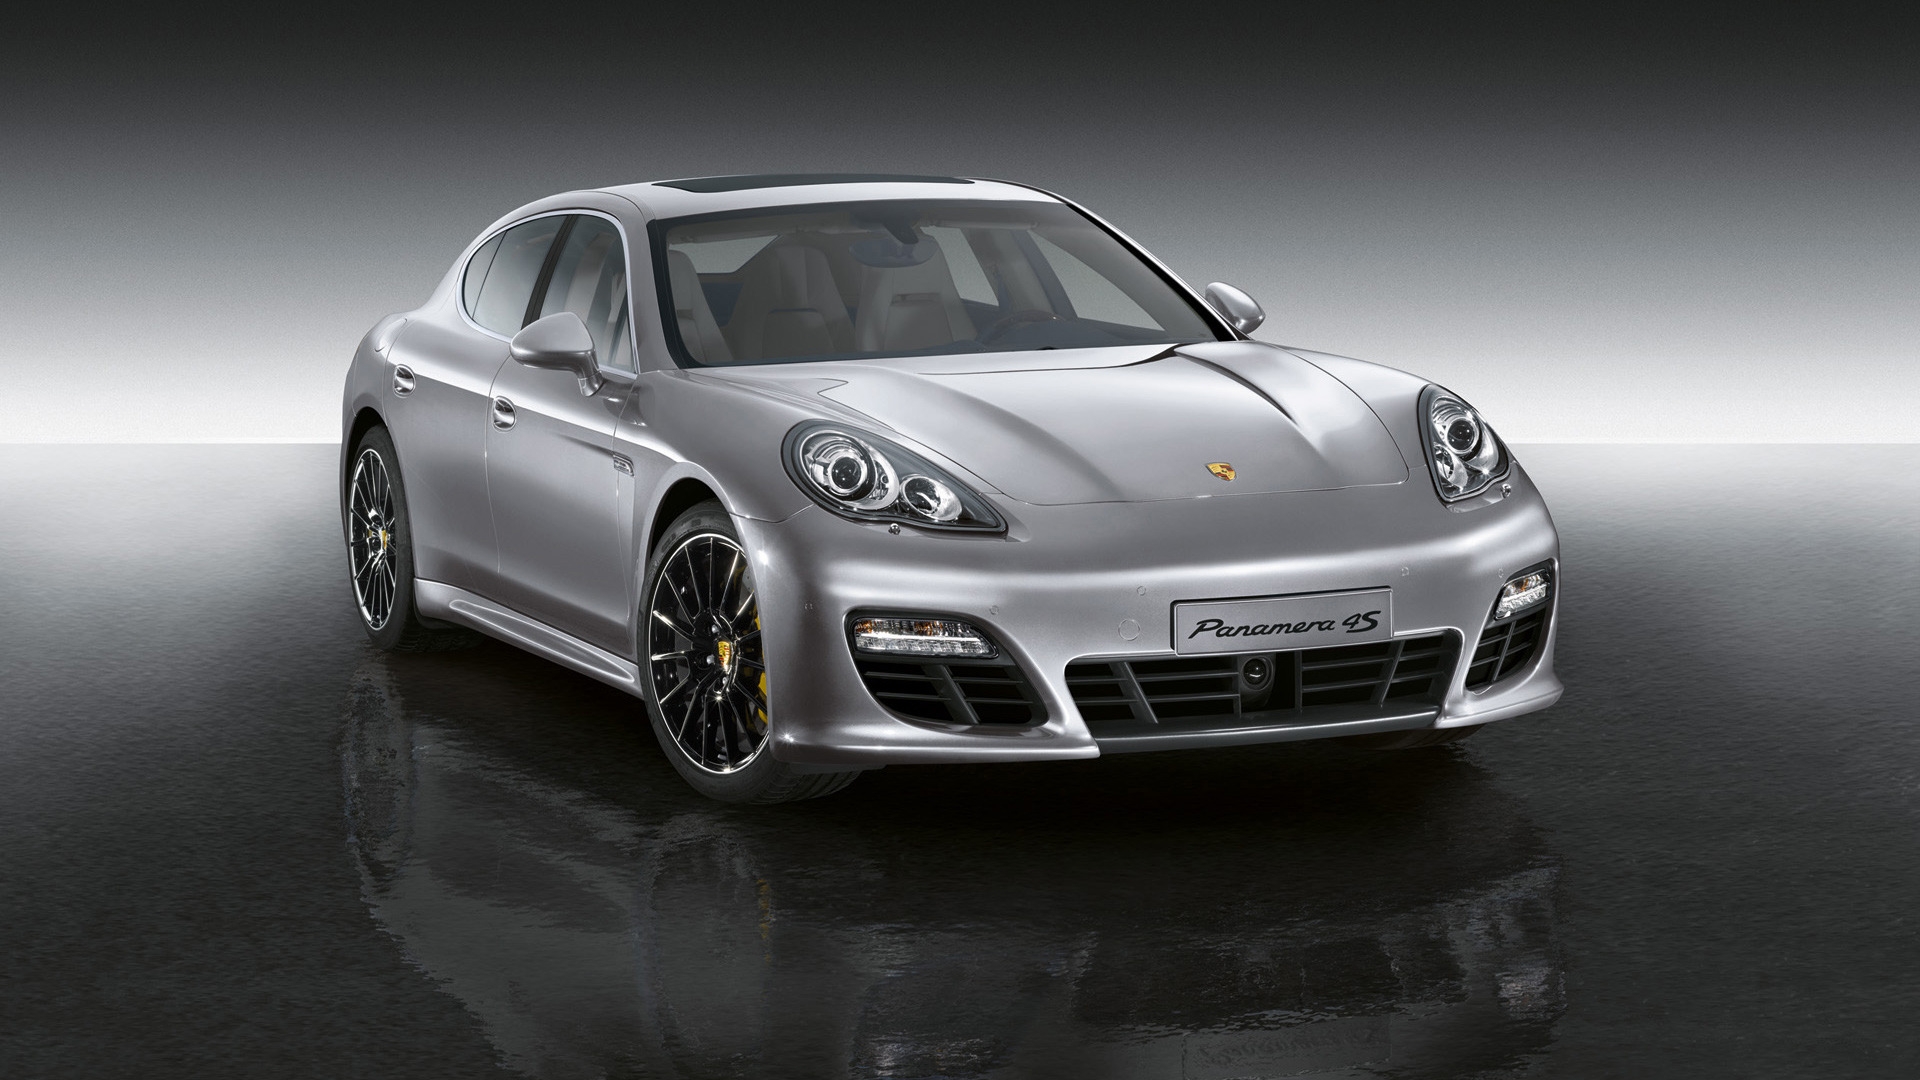 Porsche Panamera Individualization Front Angle for 1920 x 1080 HDTV 1080p resolution